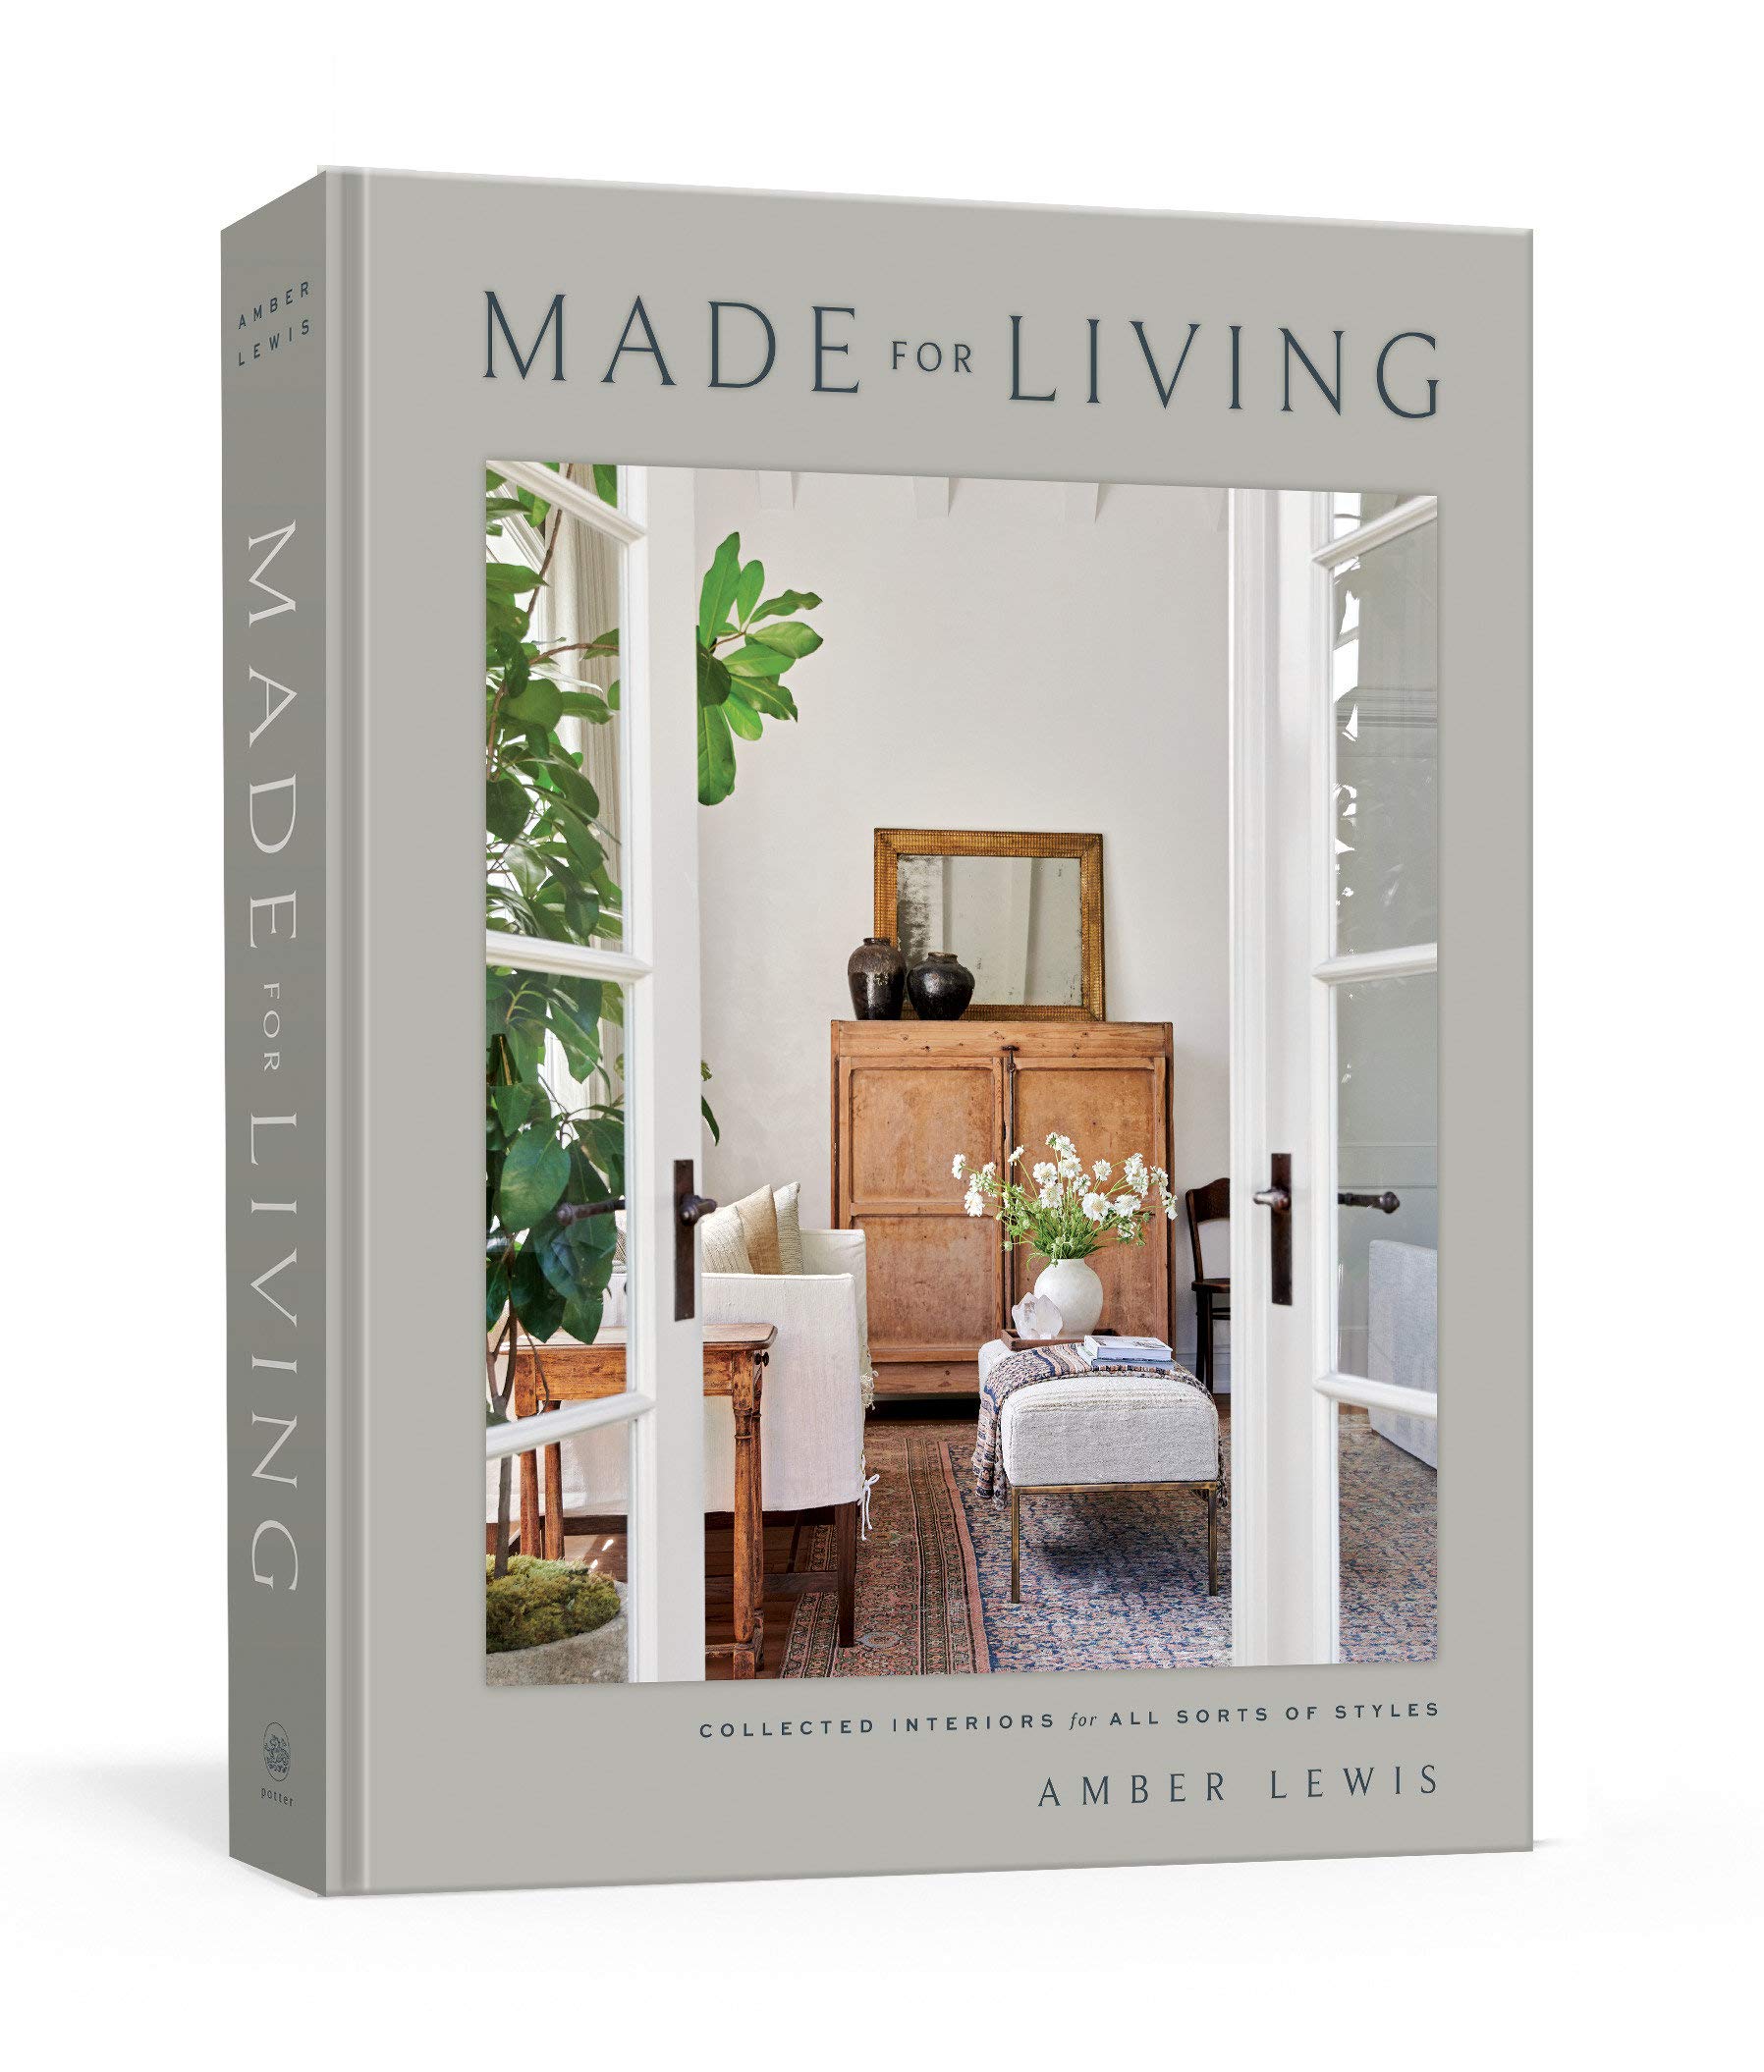 Made for living :  collected interiors for all sorts of styles